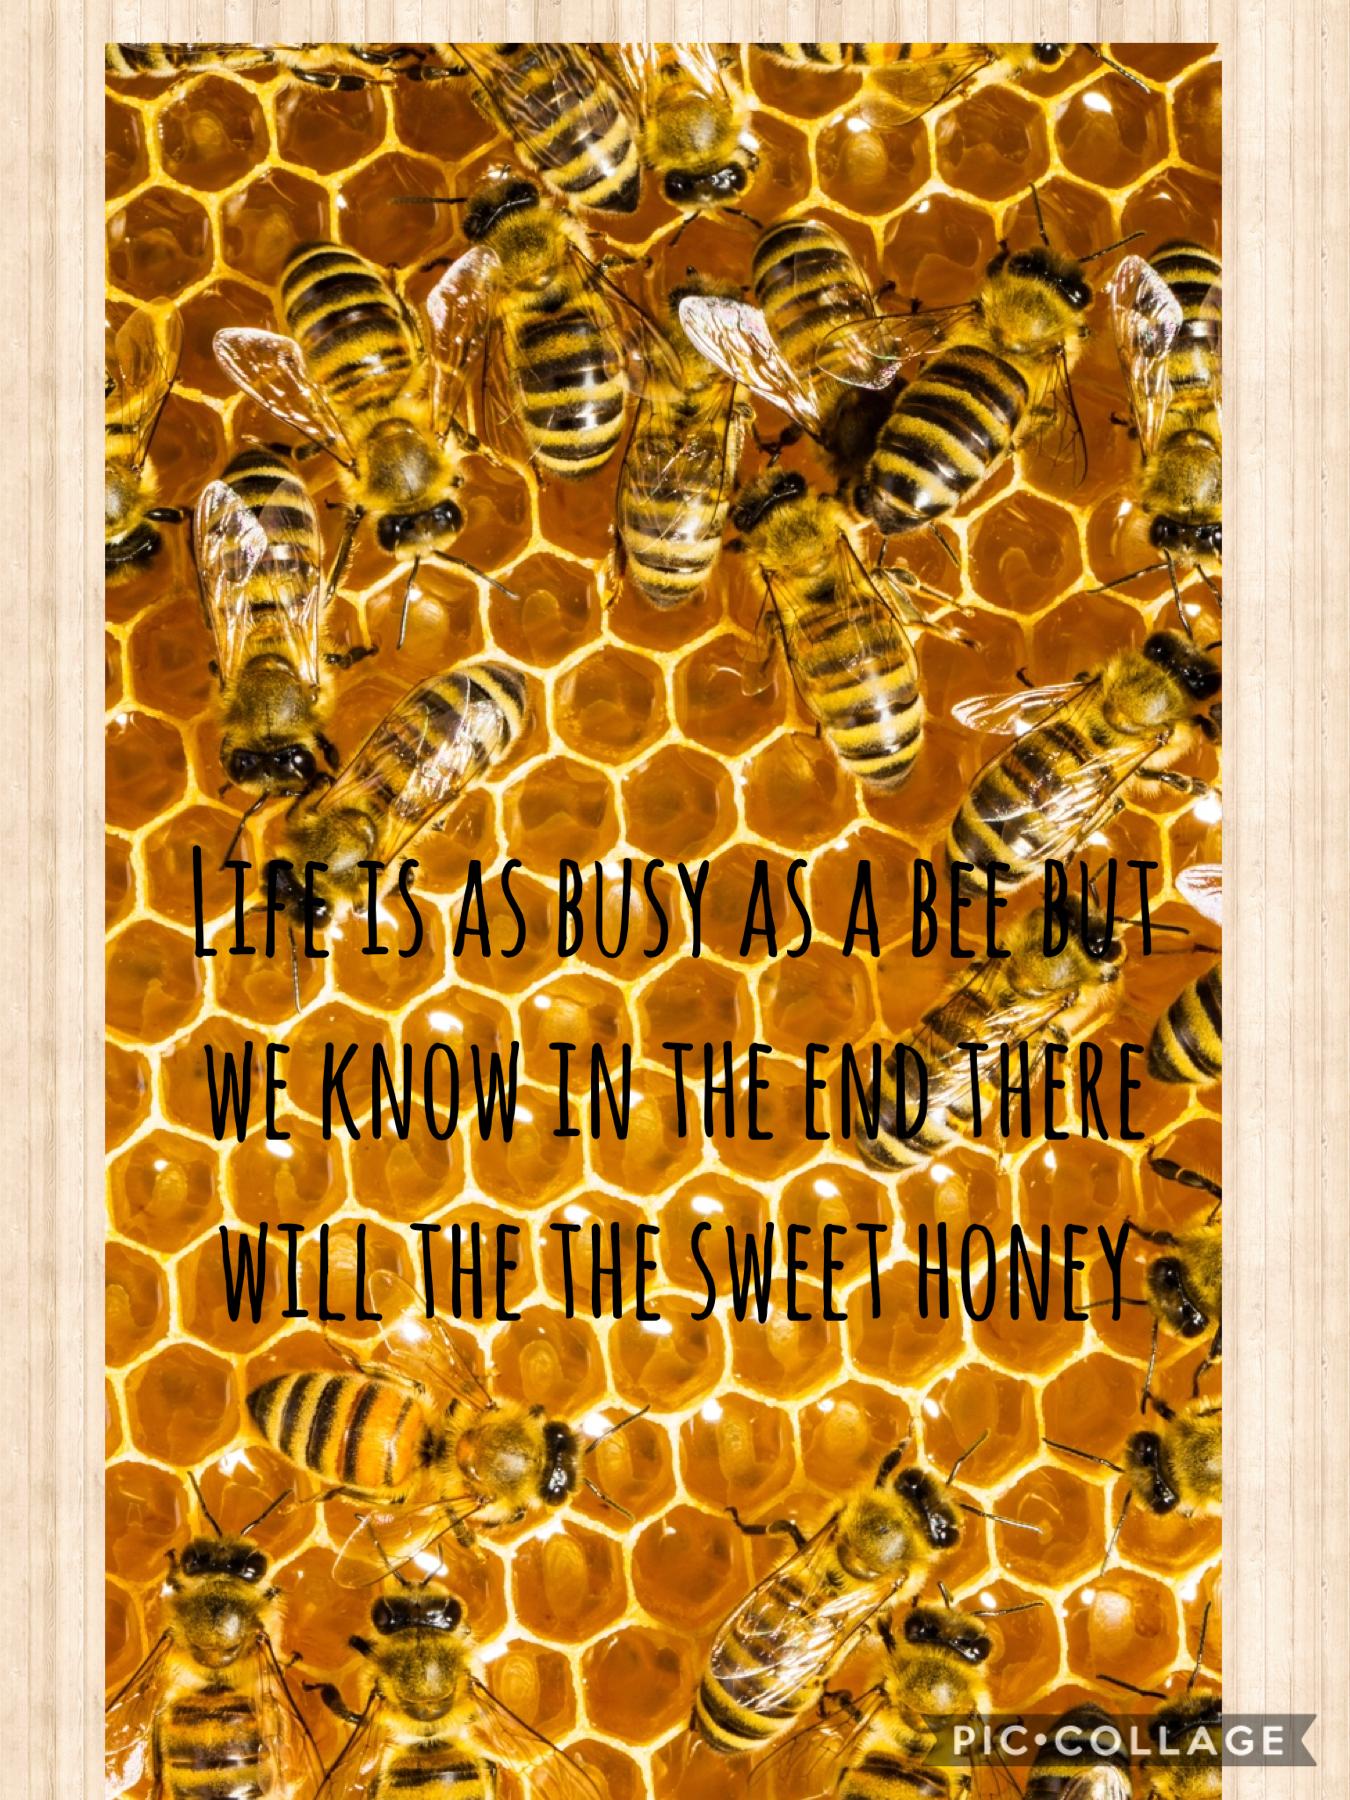 Stay positive we could all use some honey. 